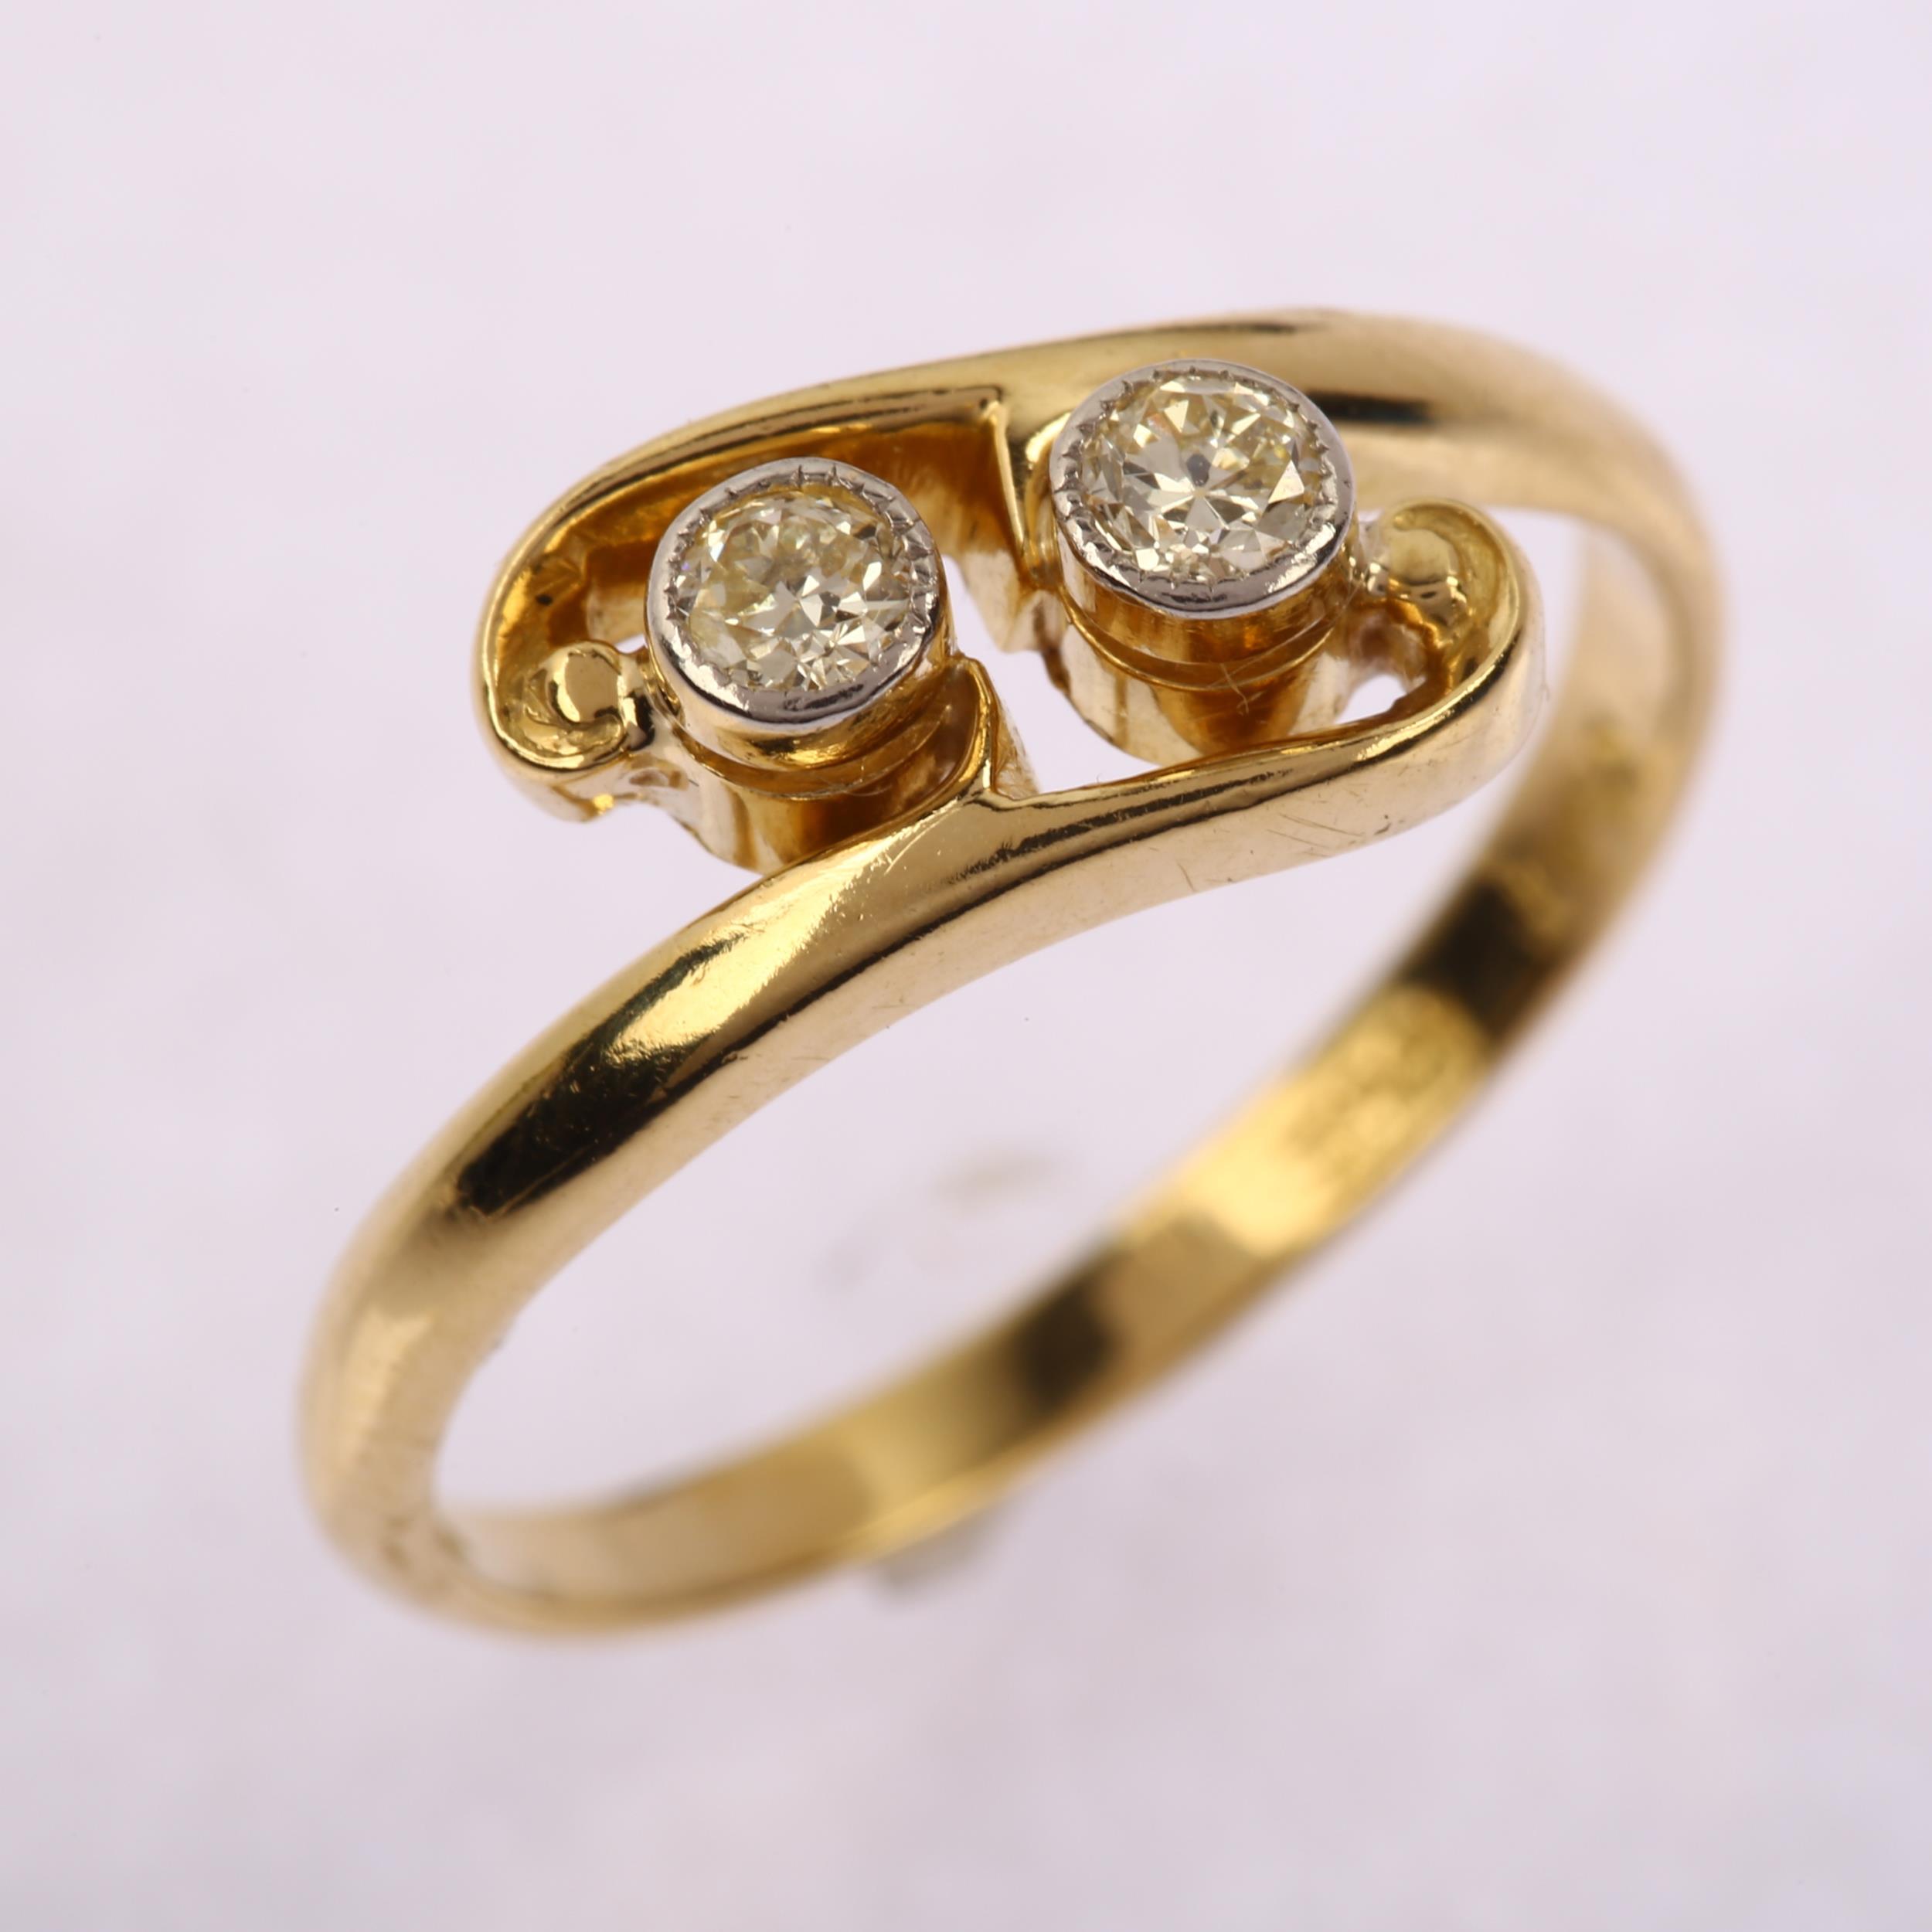 An early 20th century 18ct gold two stone diamond crossover ring, platinum-topped set with modern - Image 2 of 4